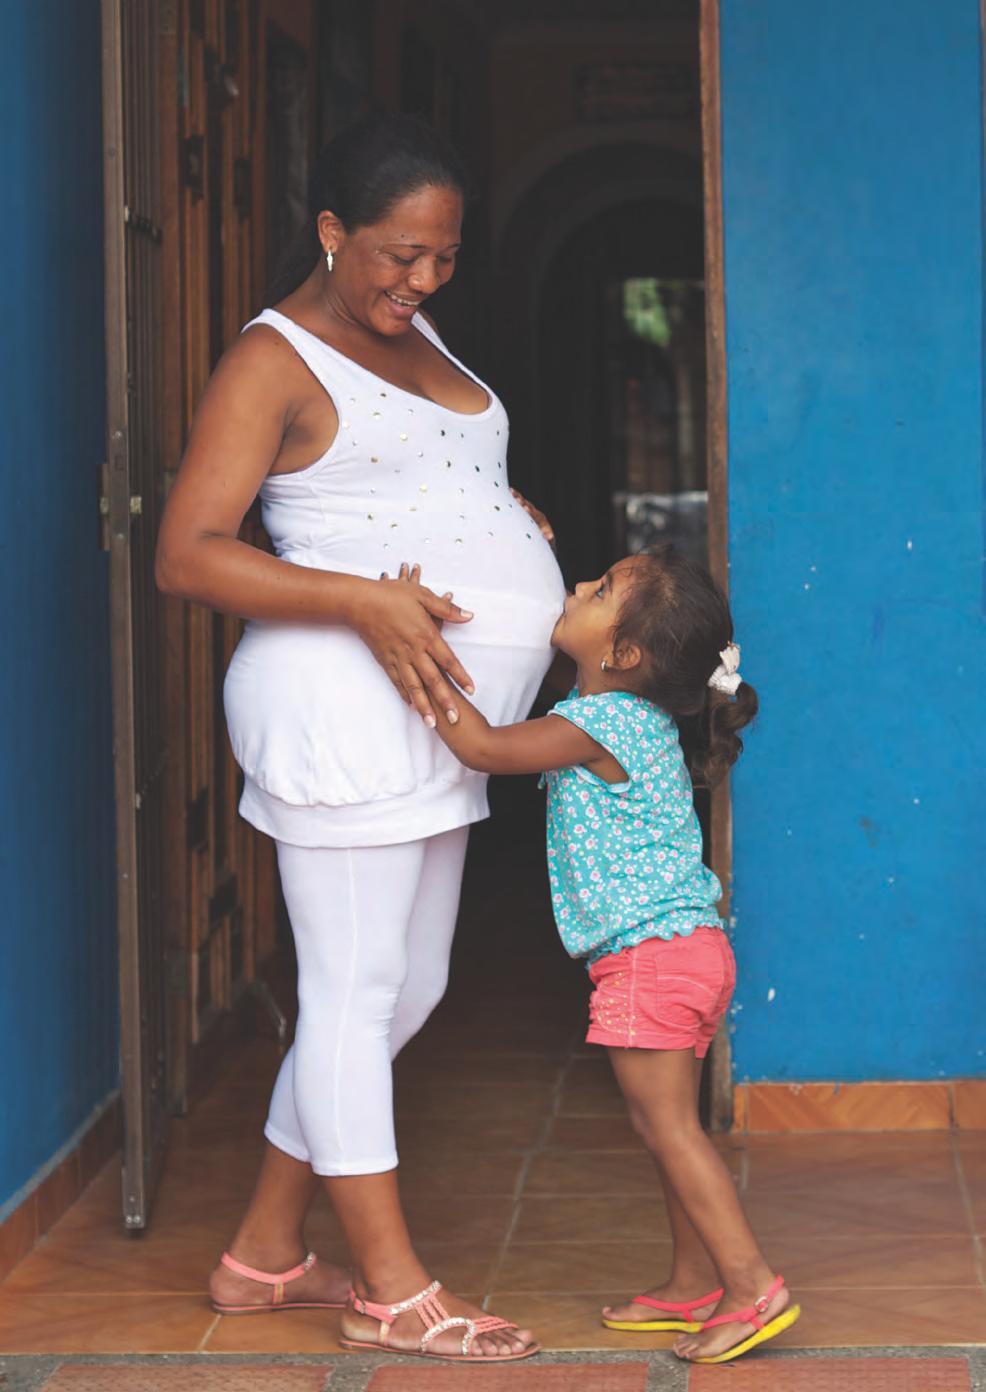 DIANA TORRECILLA Colombia Diana had gestational diabetes during her pregnancy Our contribution As a leader in diabetes care, we work to prevent, treat and ultimately cure diabetes.